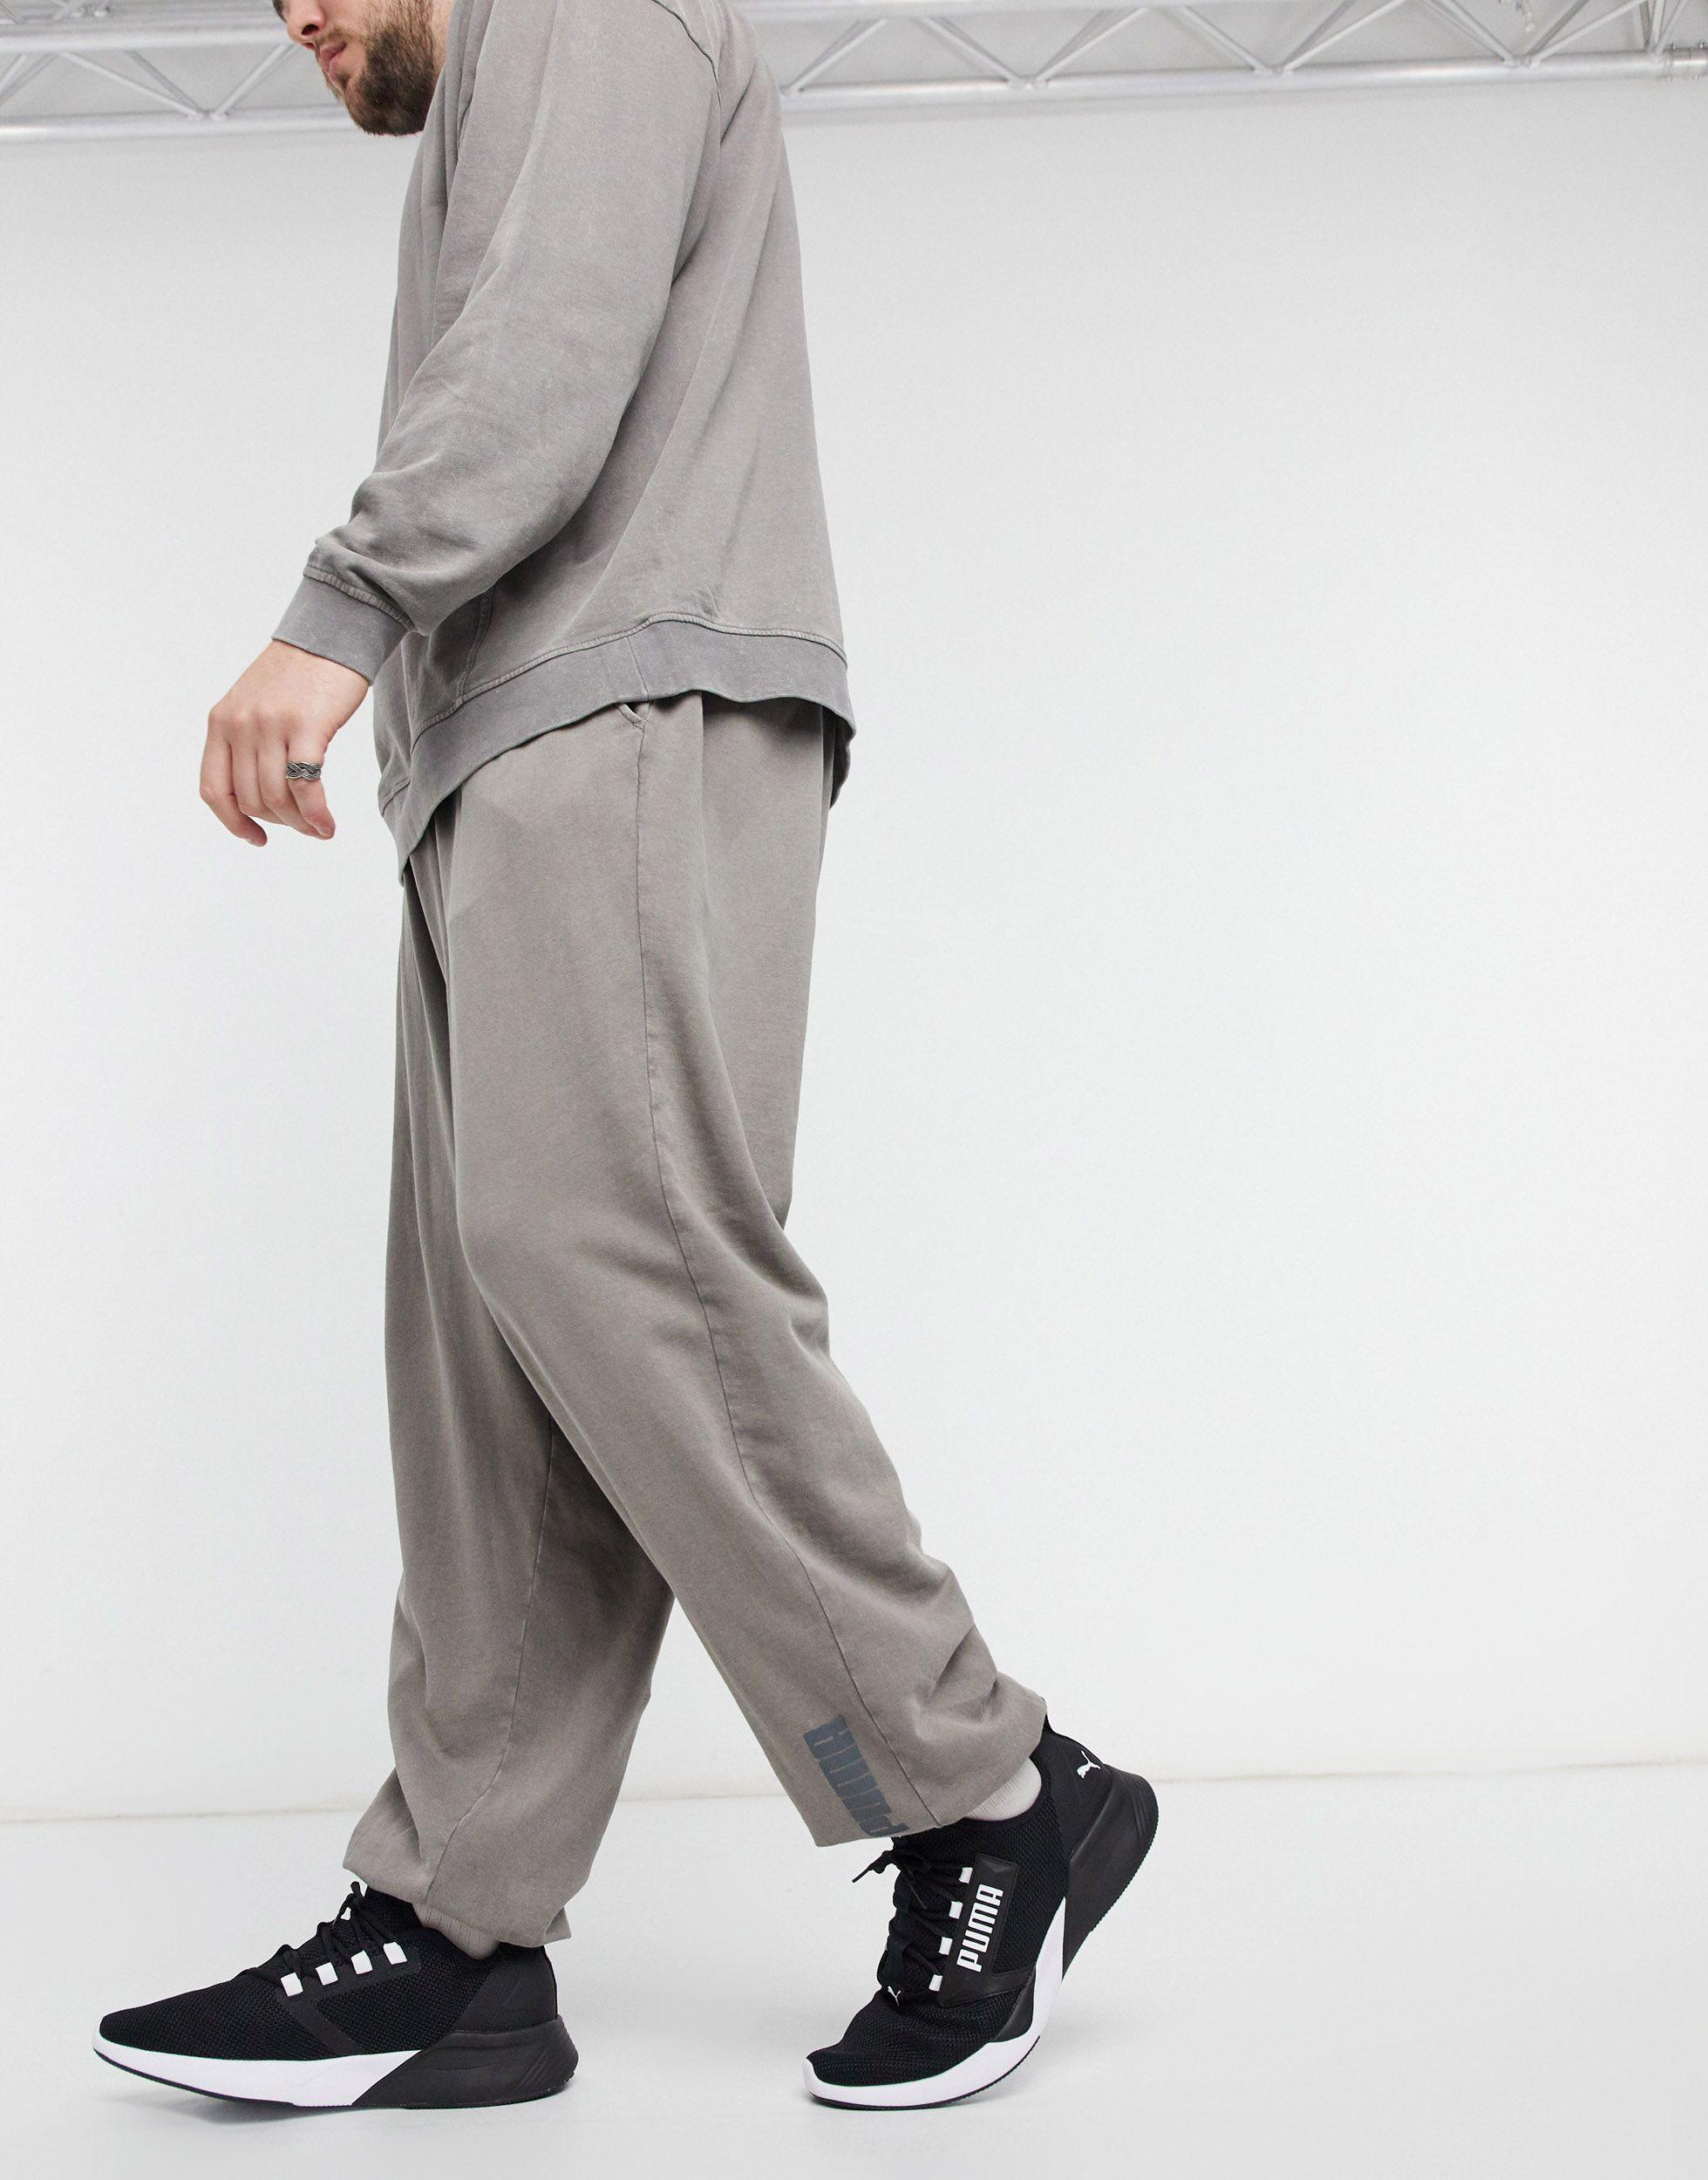 PUMA Plus Oversized Trackies in Gray for Men - Lyst